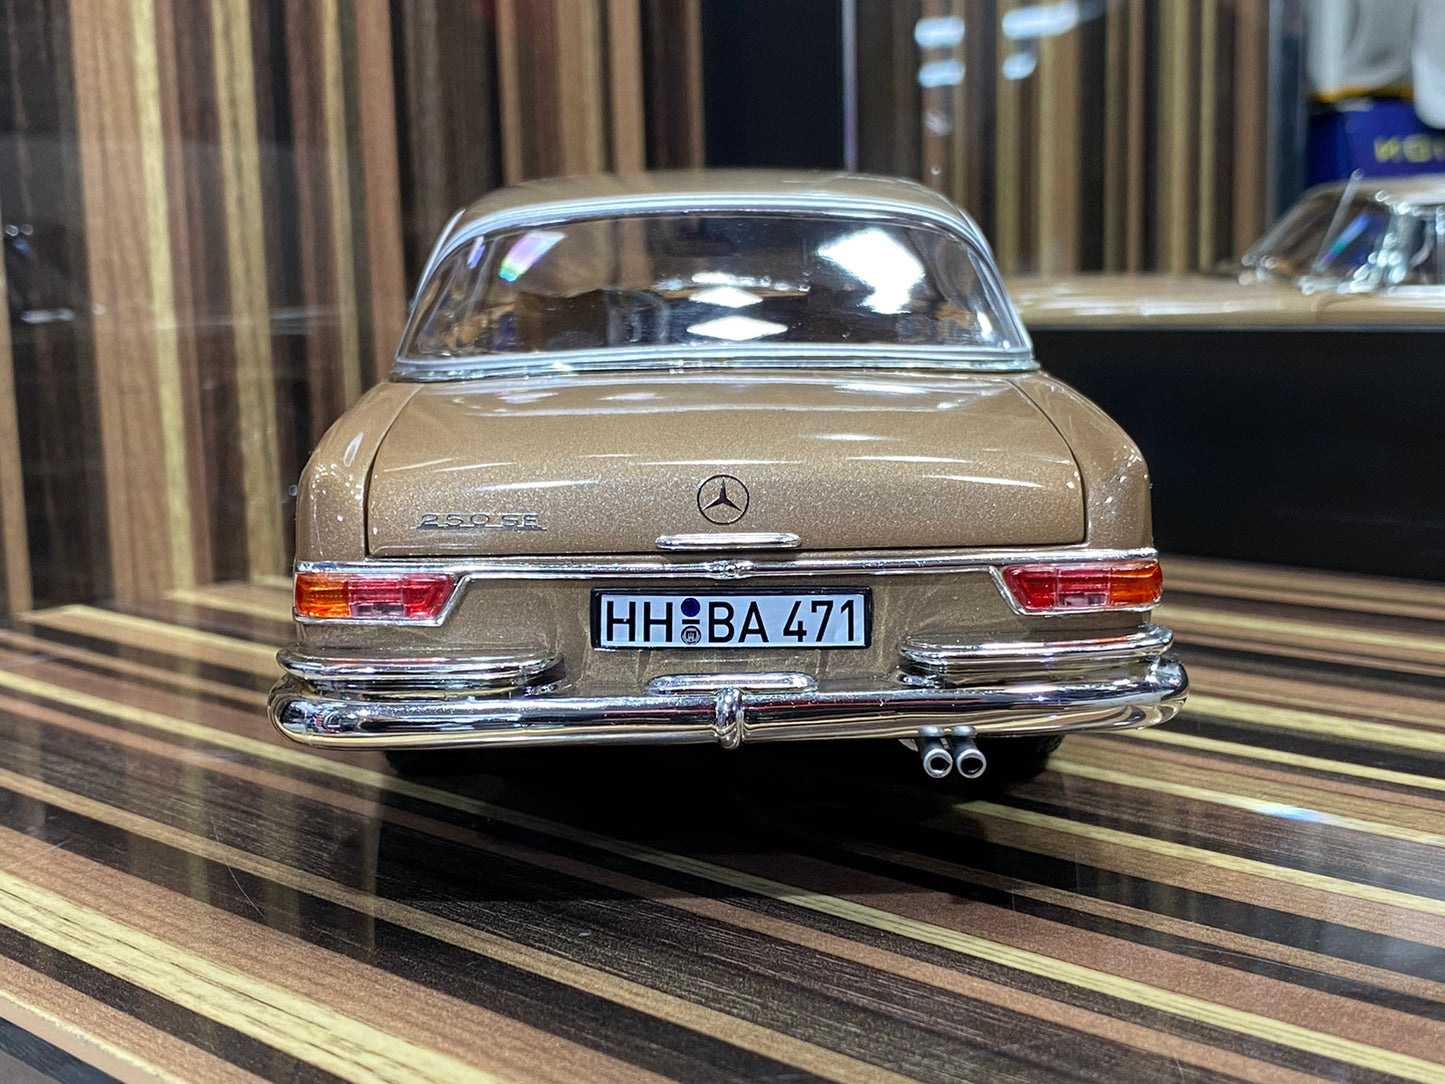 1/18 Diecast Mercedes-Benz 250 SE Coupe 1969 Gold Metallic Scale Model car by Norev